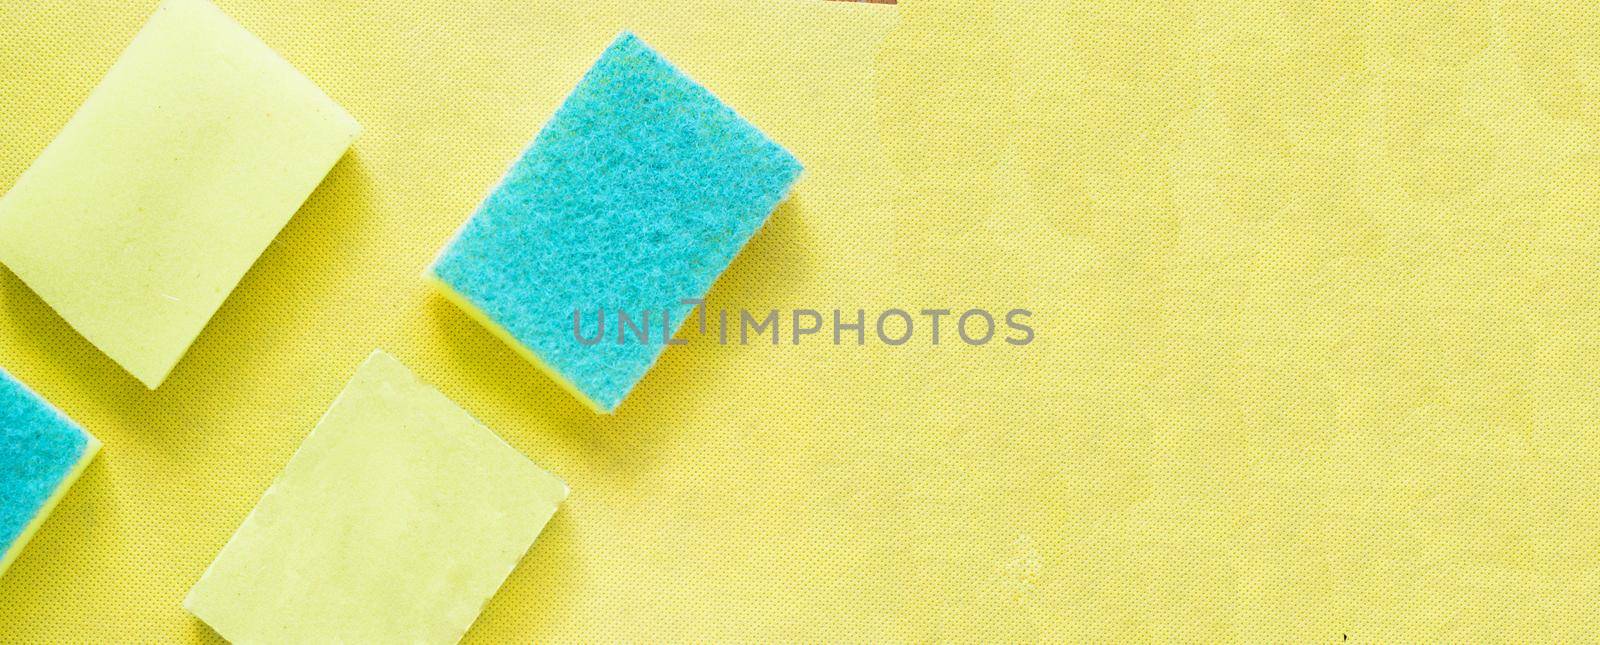 Several bright yellow sponges on yellow background.Advertising banner for cleaning.